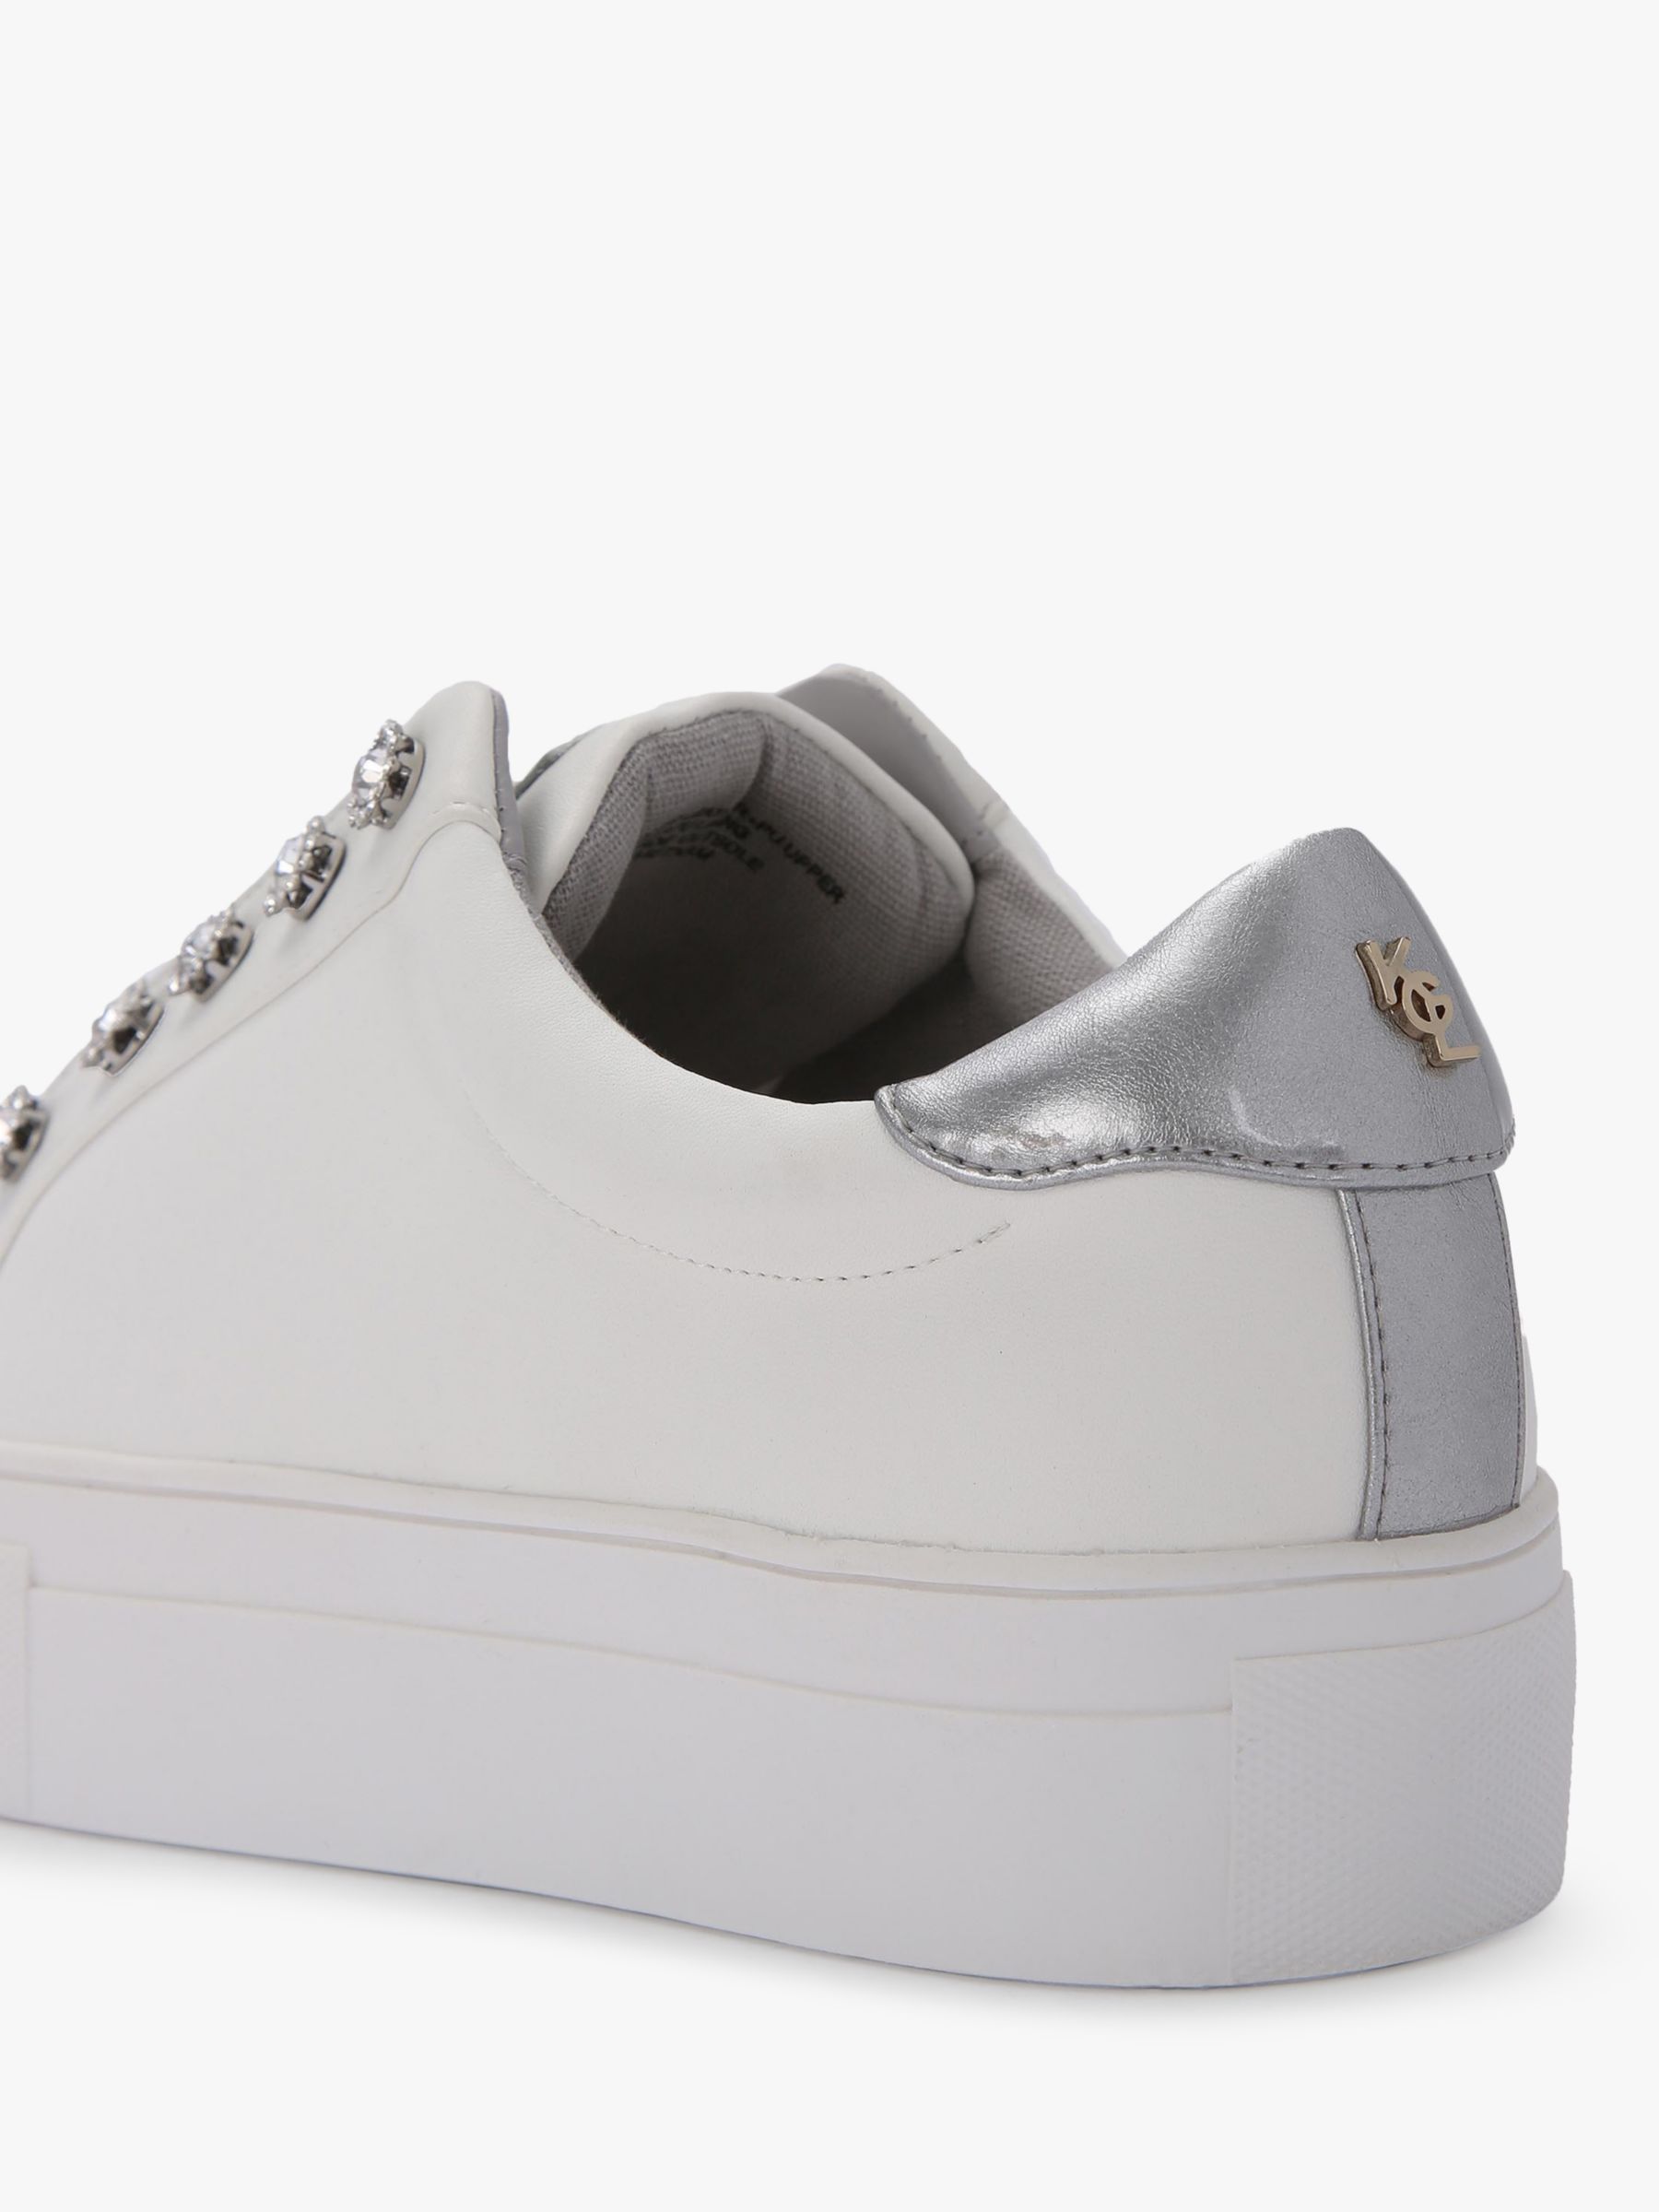 Kurt Geiger London Liviah Crystal Embellished Trainers, White/Silver at ...